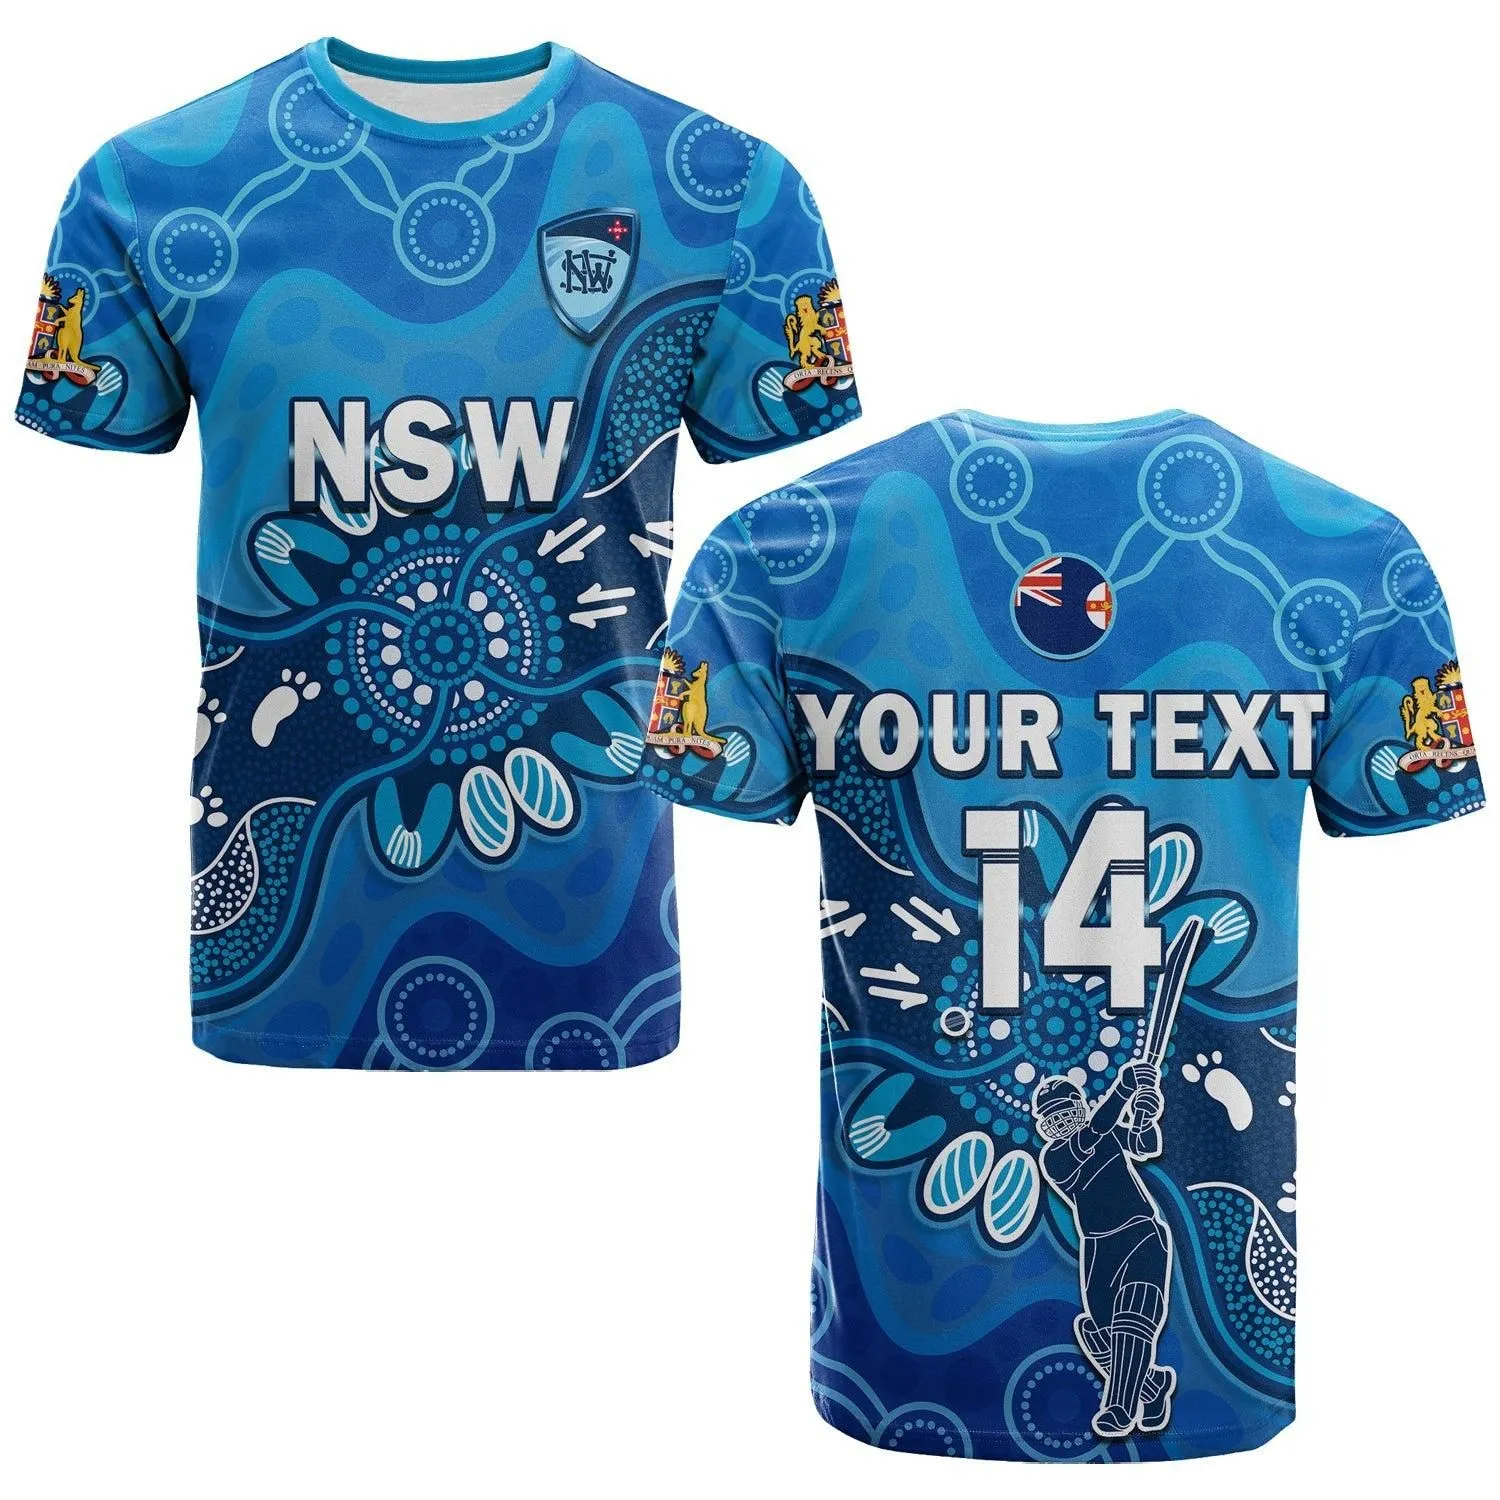 (Custom Text And Number) New South Wales Cricket T Shirt Nsw 2022 Aboriginal Art Lt14_5